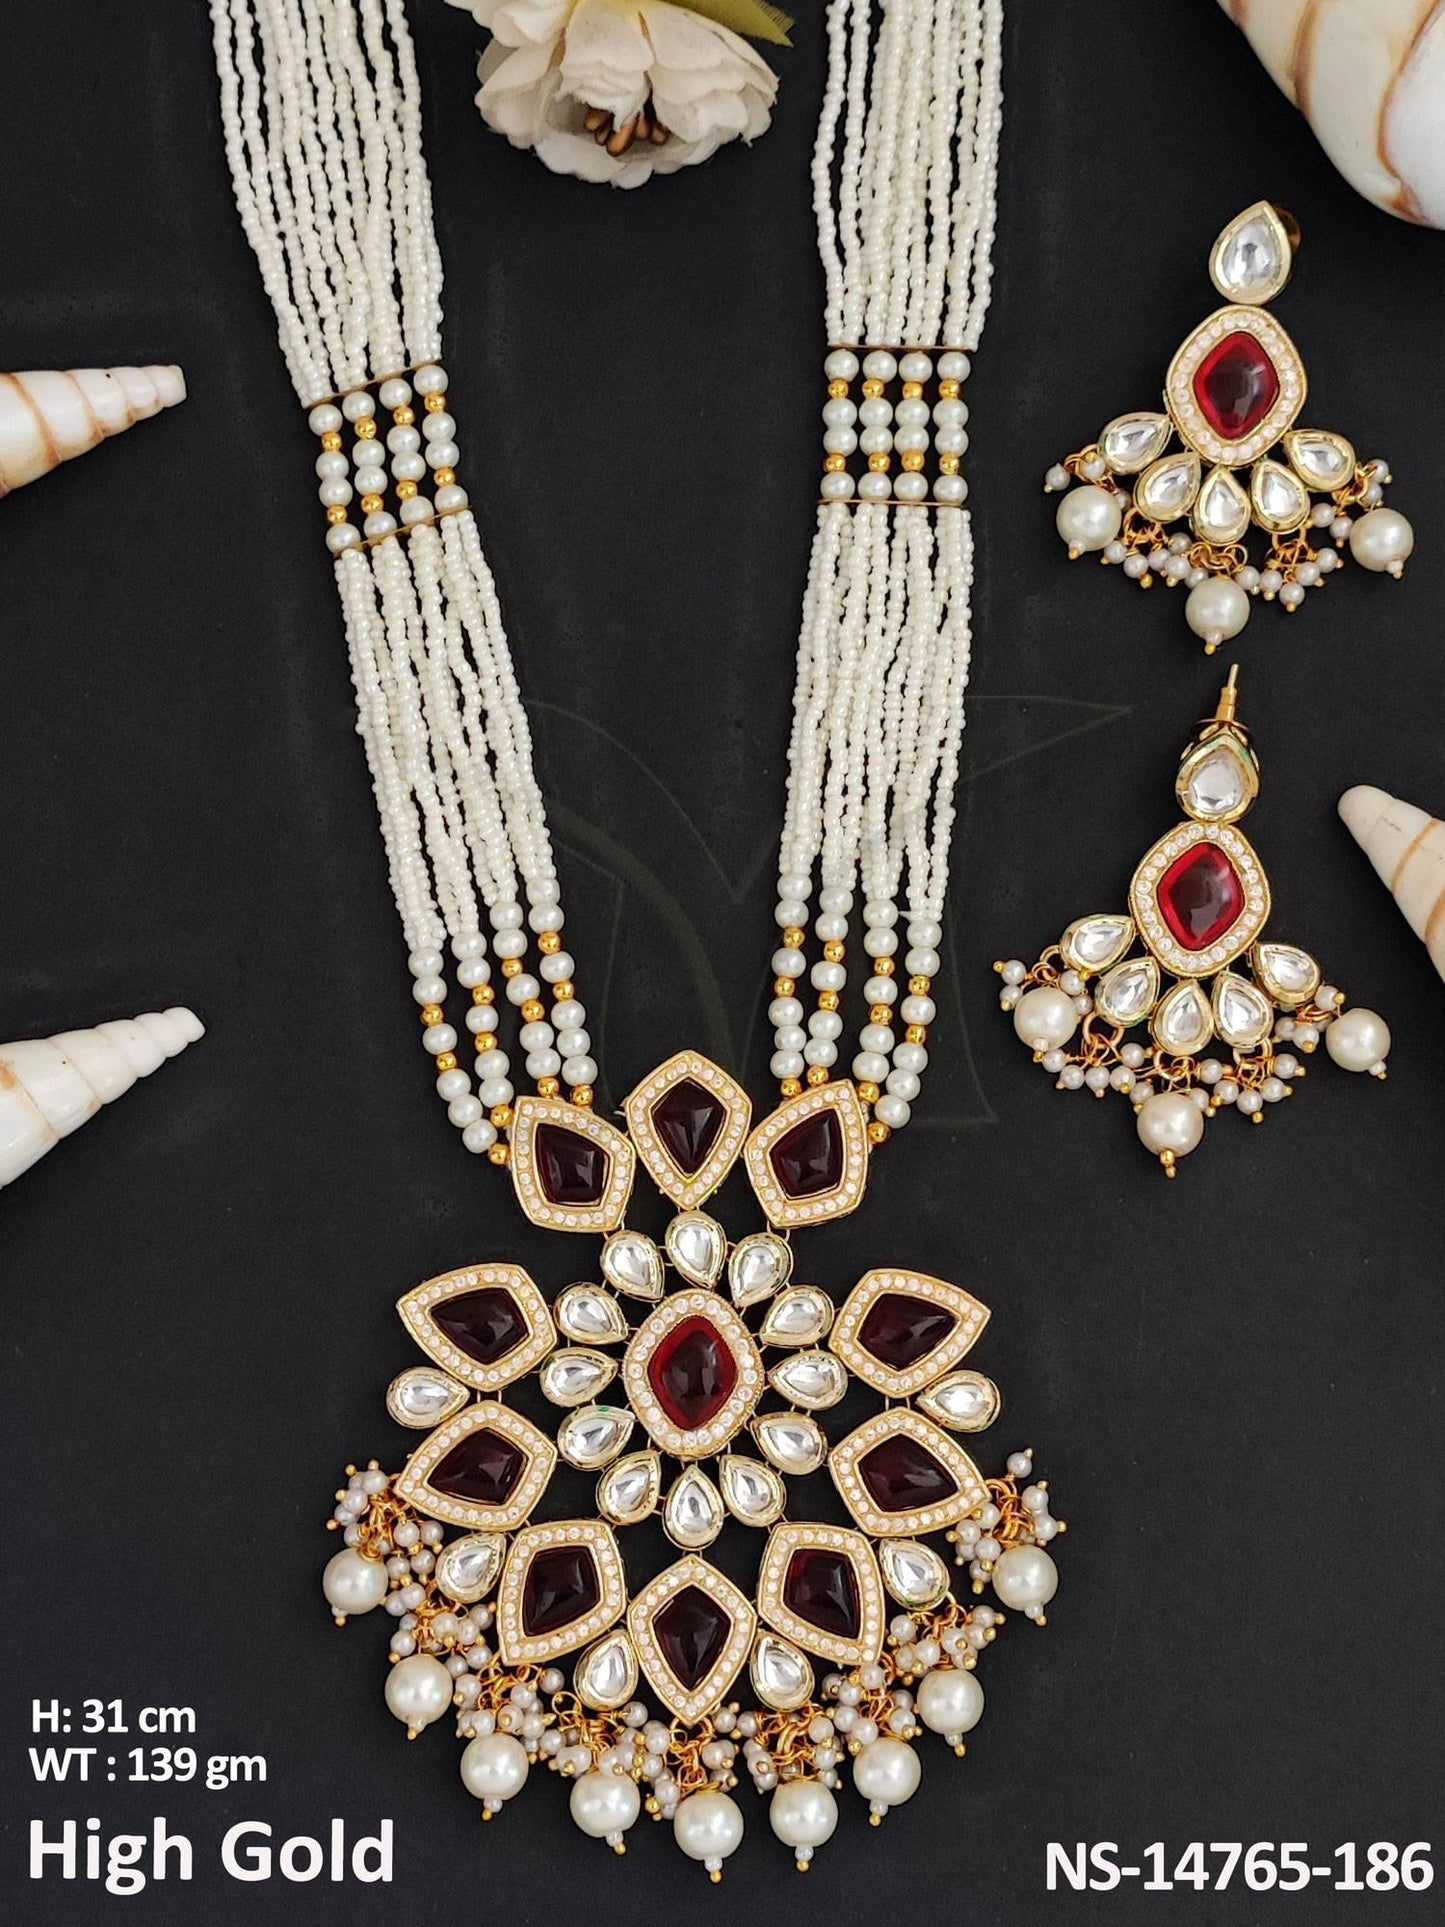 This Kundan Jewellery Fancy Design Long Necklace Set is crafted with high-gold polish on brass metal.